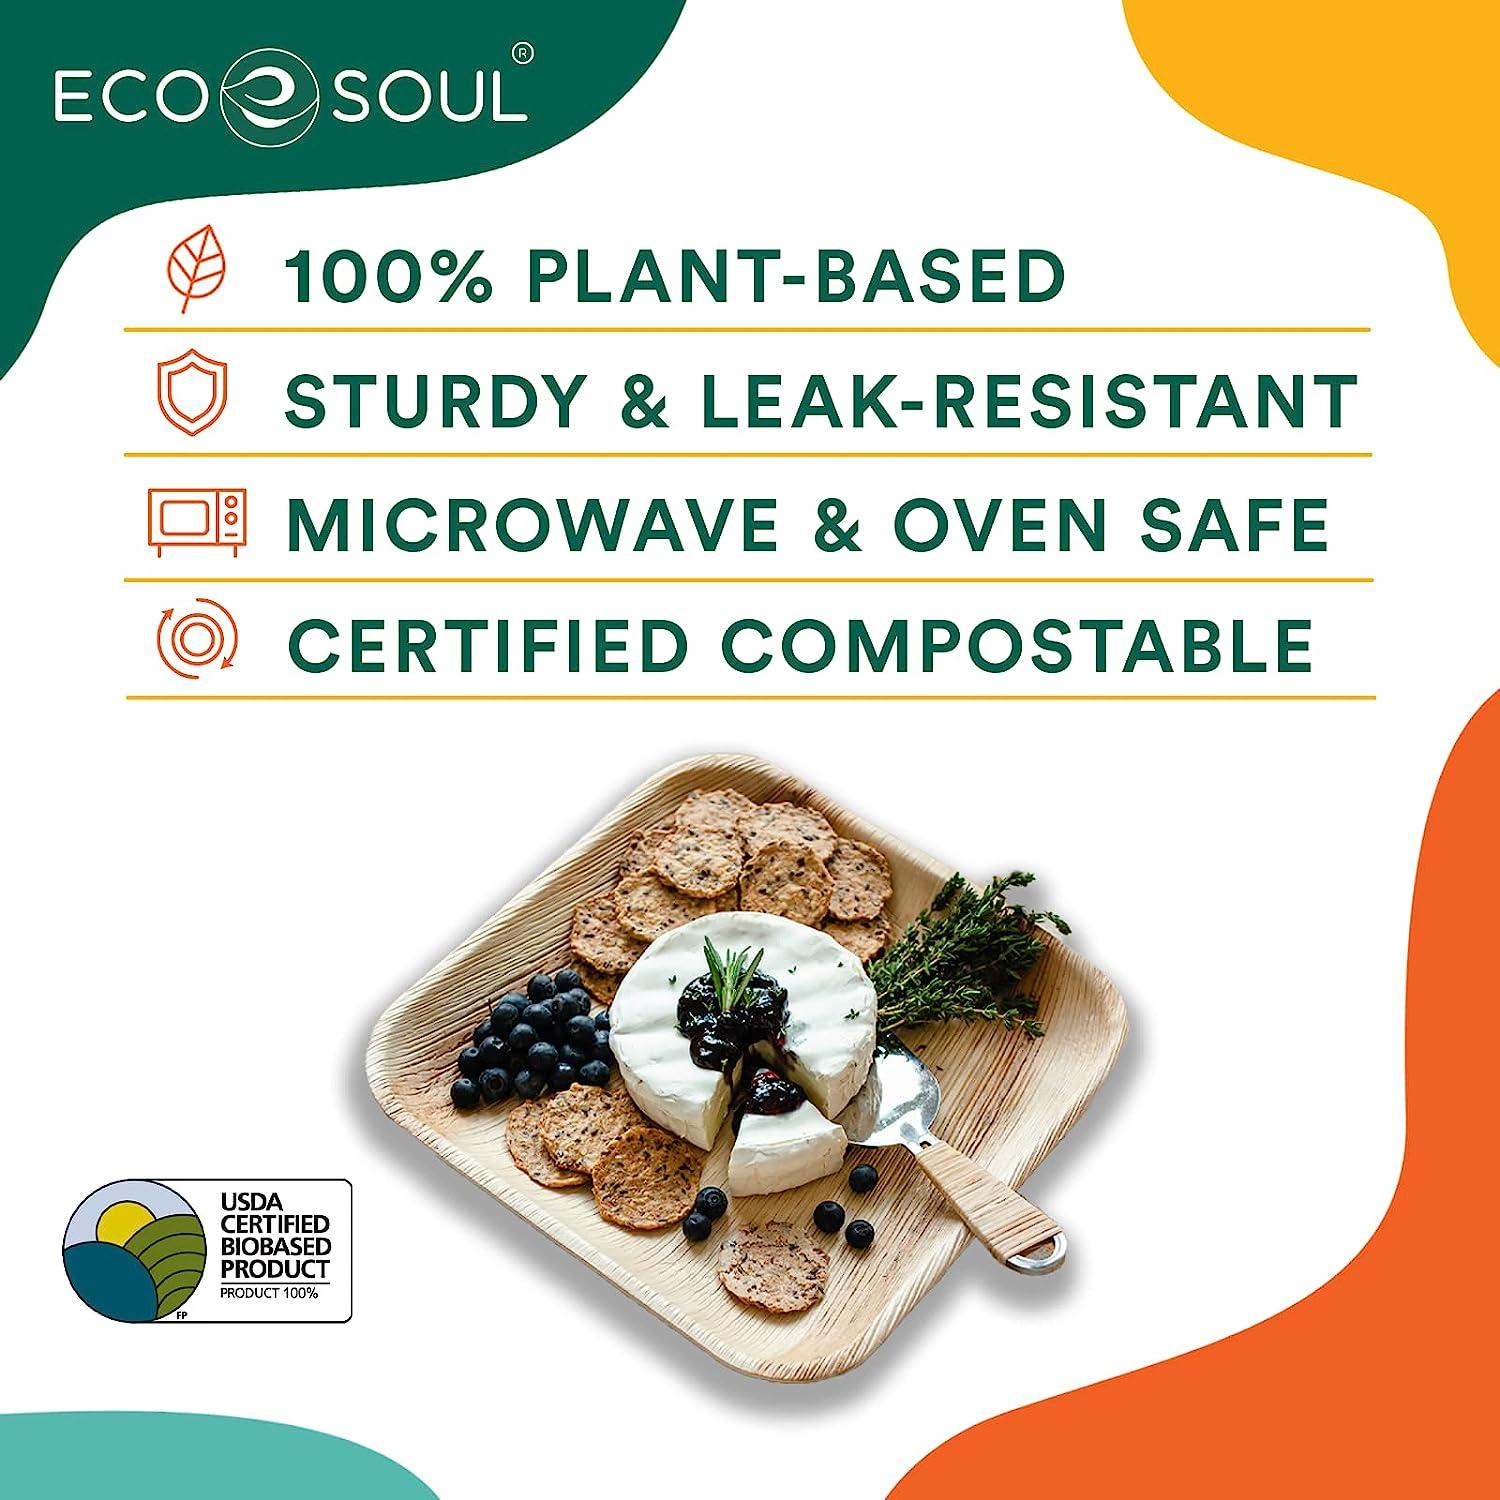 7 Inch Disposable Plate 100% Compostable Bamboo Fiber Eco Friendly